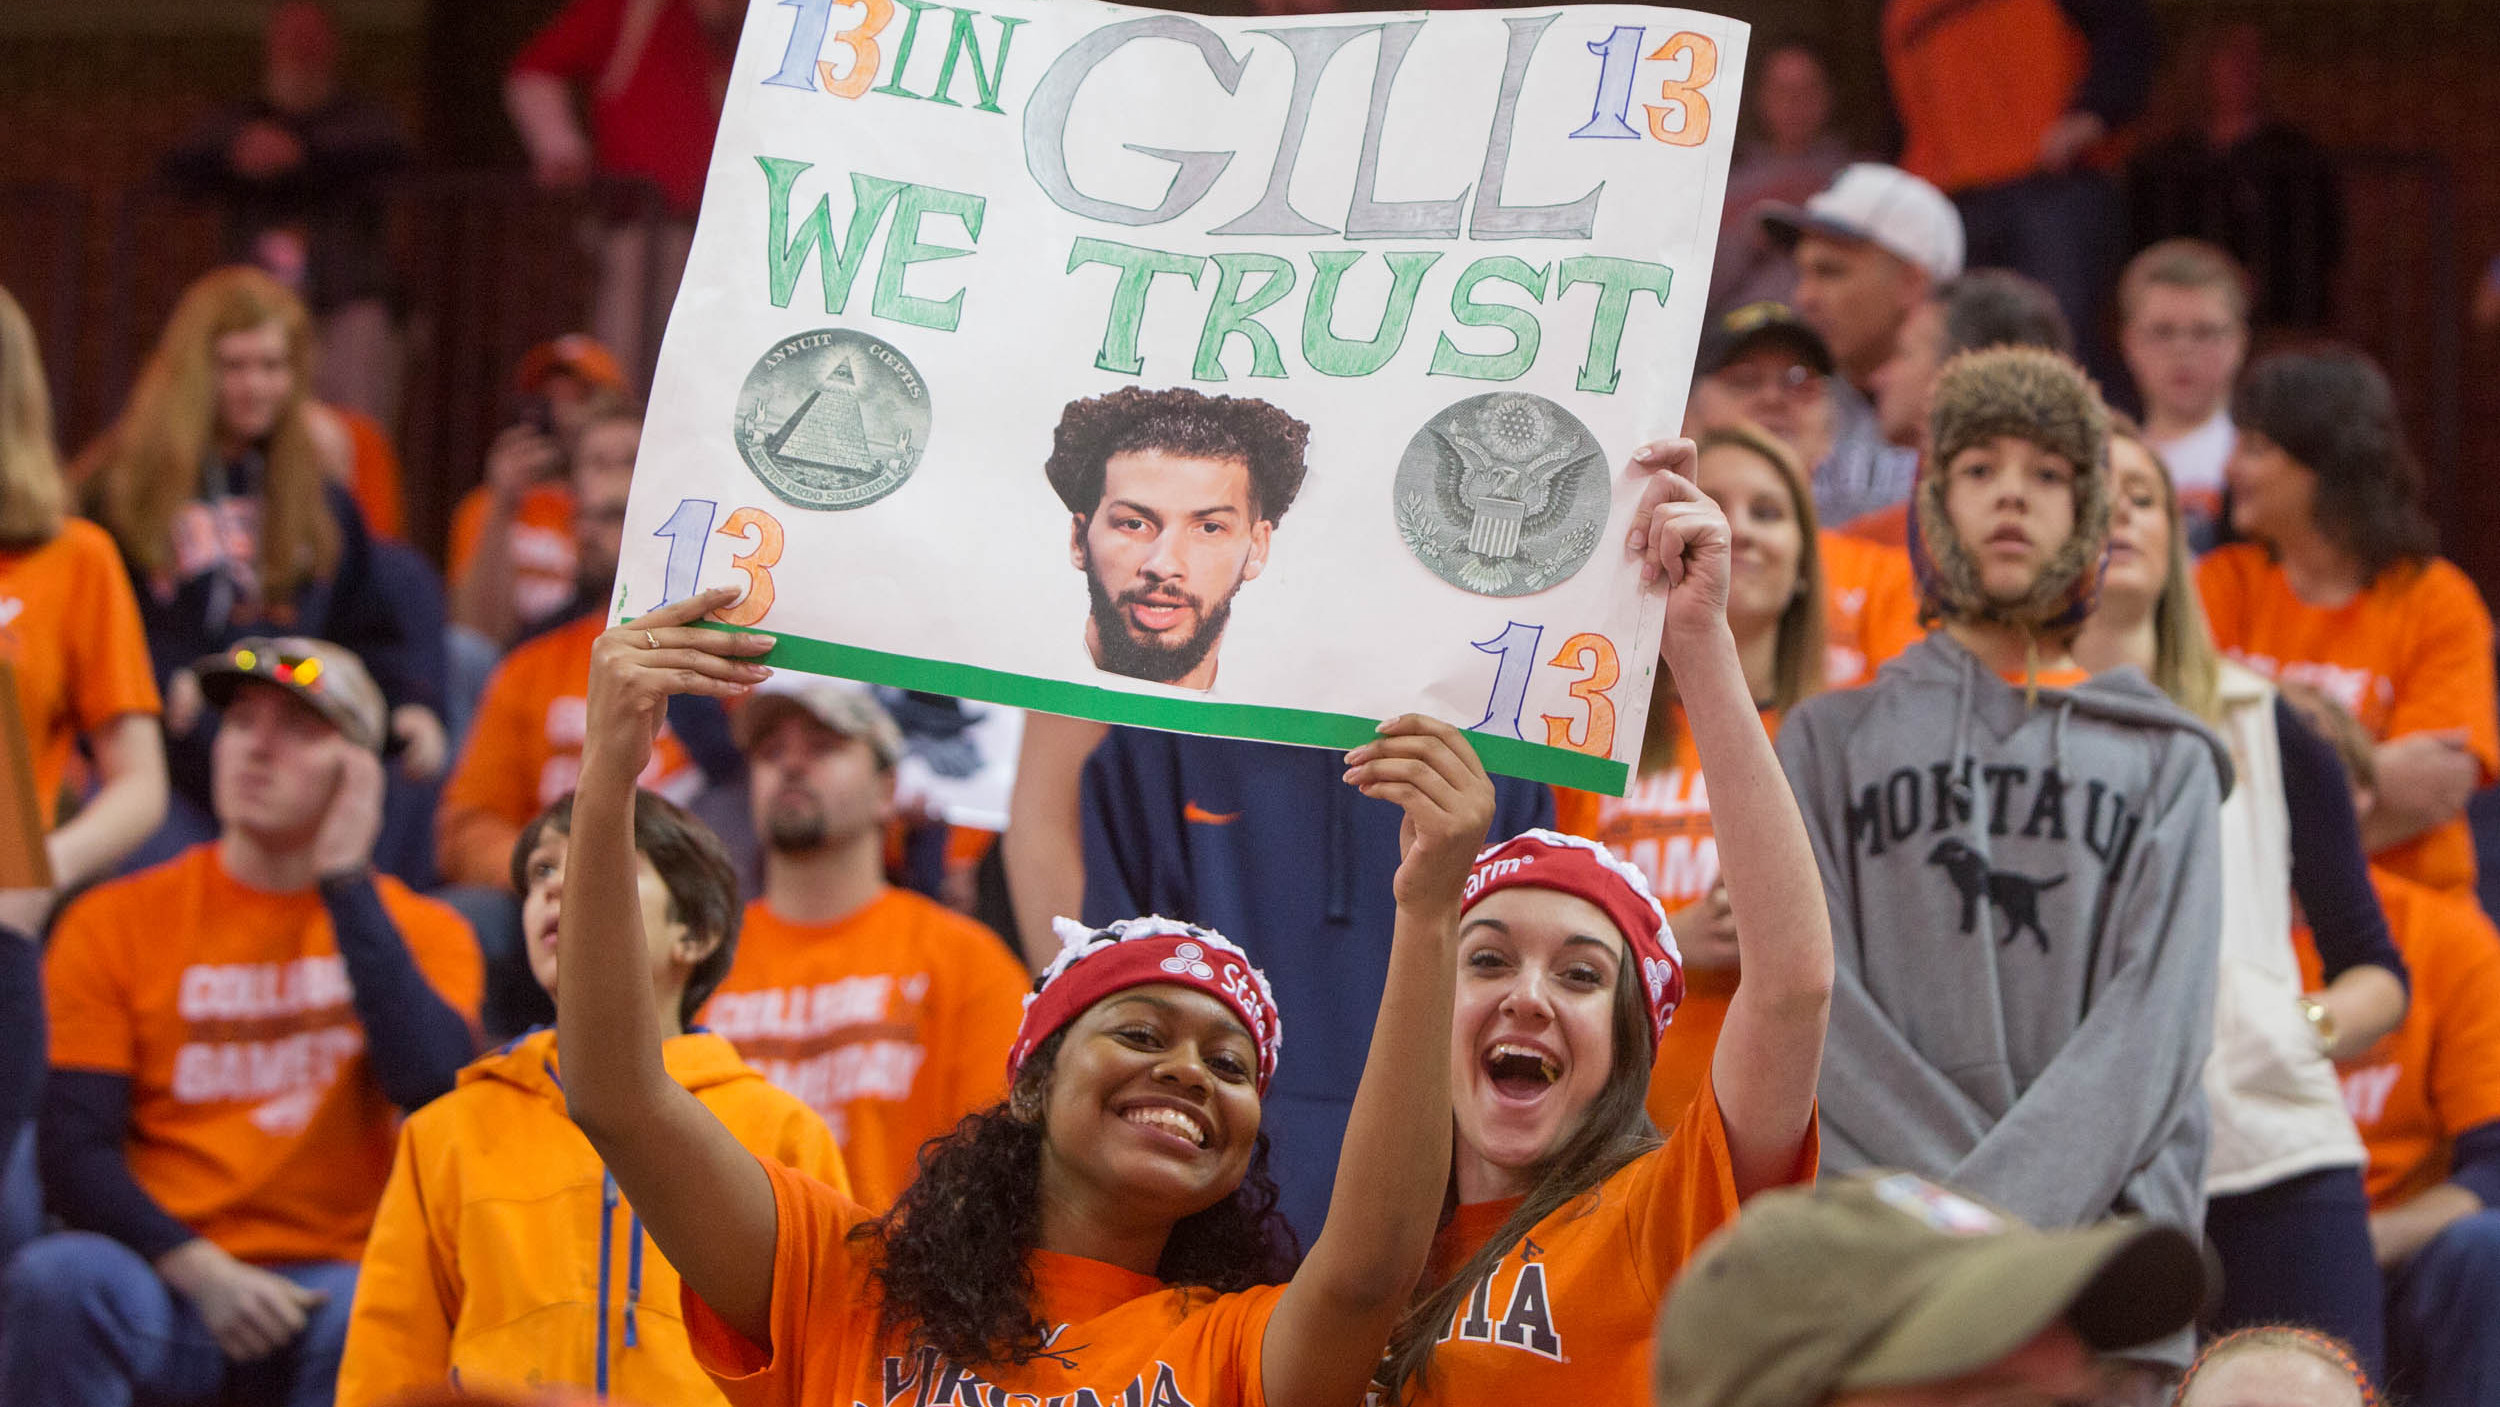 Two women at a basketball game holds a sign that says in Gill we trust